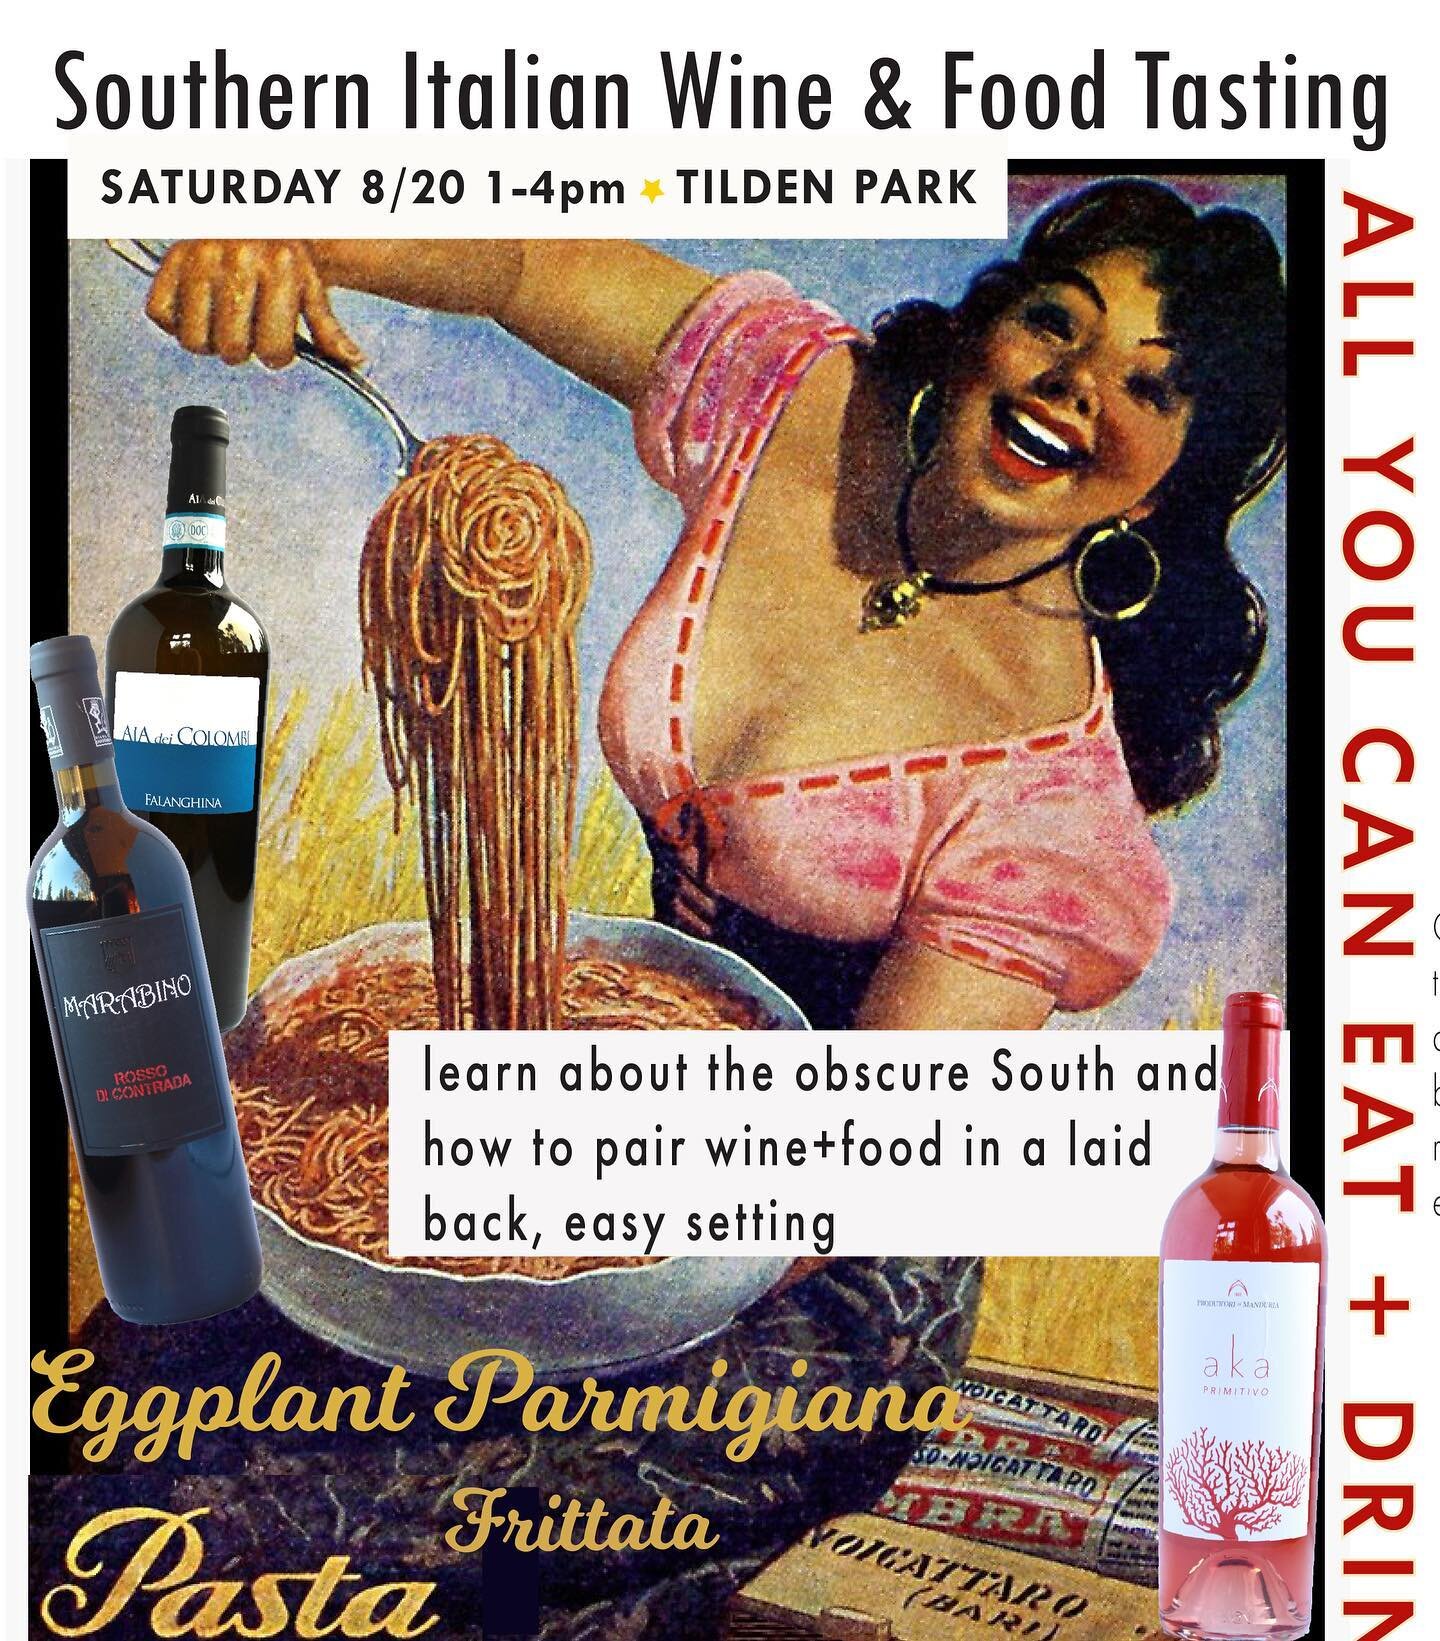 What are you doing Saturday August 20th? Come hang out!!

We&rsquo;ll be outdoors at Tilden Park drinking a selection of southern Italian wines and learning how to pair wine with food. It will be chill, fun, and it&rsquo;s all you can eat and drink!
